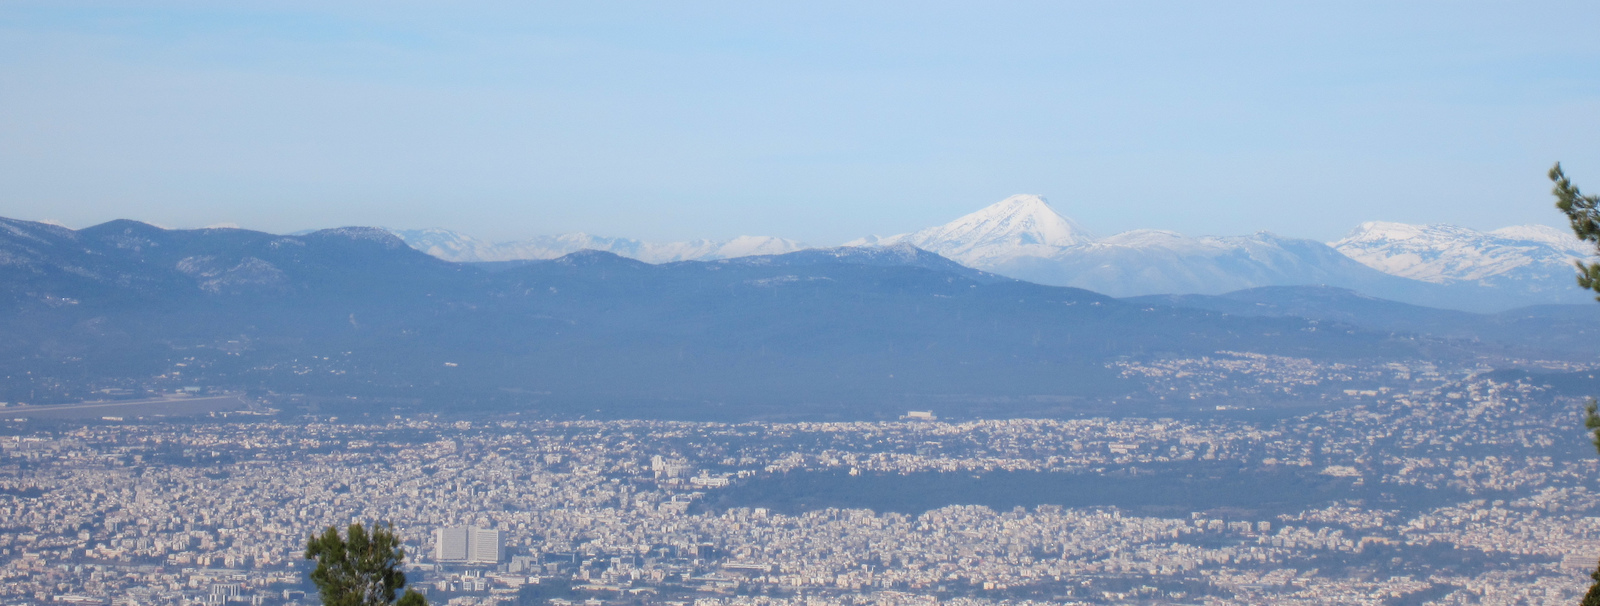 Dirfi mountain, as it can be seen from Ymittos in a very clear day